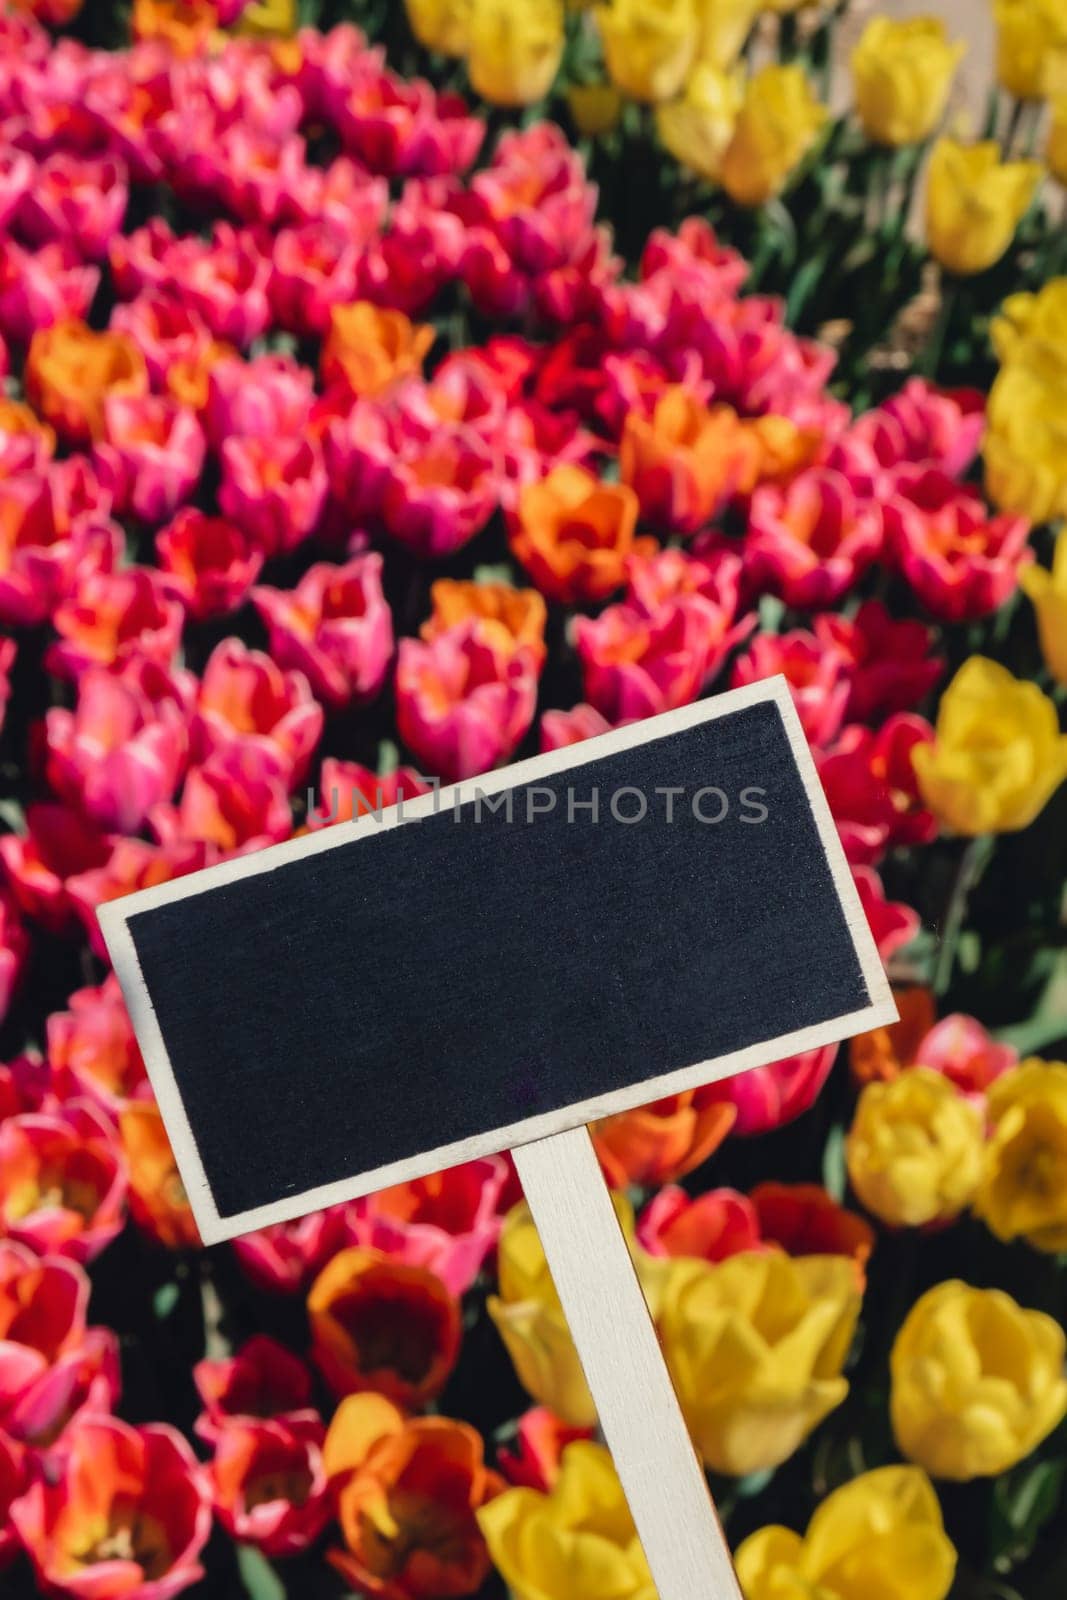 Empty blackboard with copy space for your text. Mockup template Blooming floral park in sunrise light. Colorful Tulip flowers blooming in the garden field landscape. Beautiful spring garden with many red tulips outdoors. Stripped tulips growing in flourish meadow sunny day Keukenhof. Natural floral pattern blowing in wind in spring